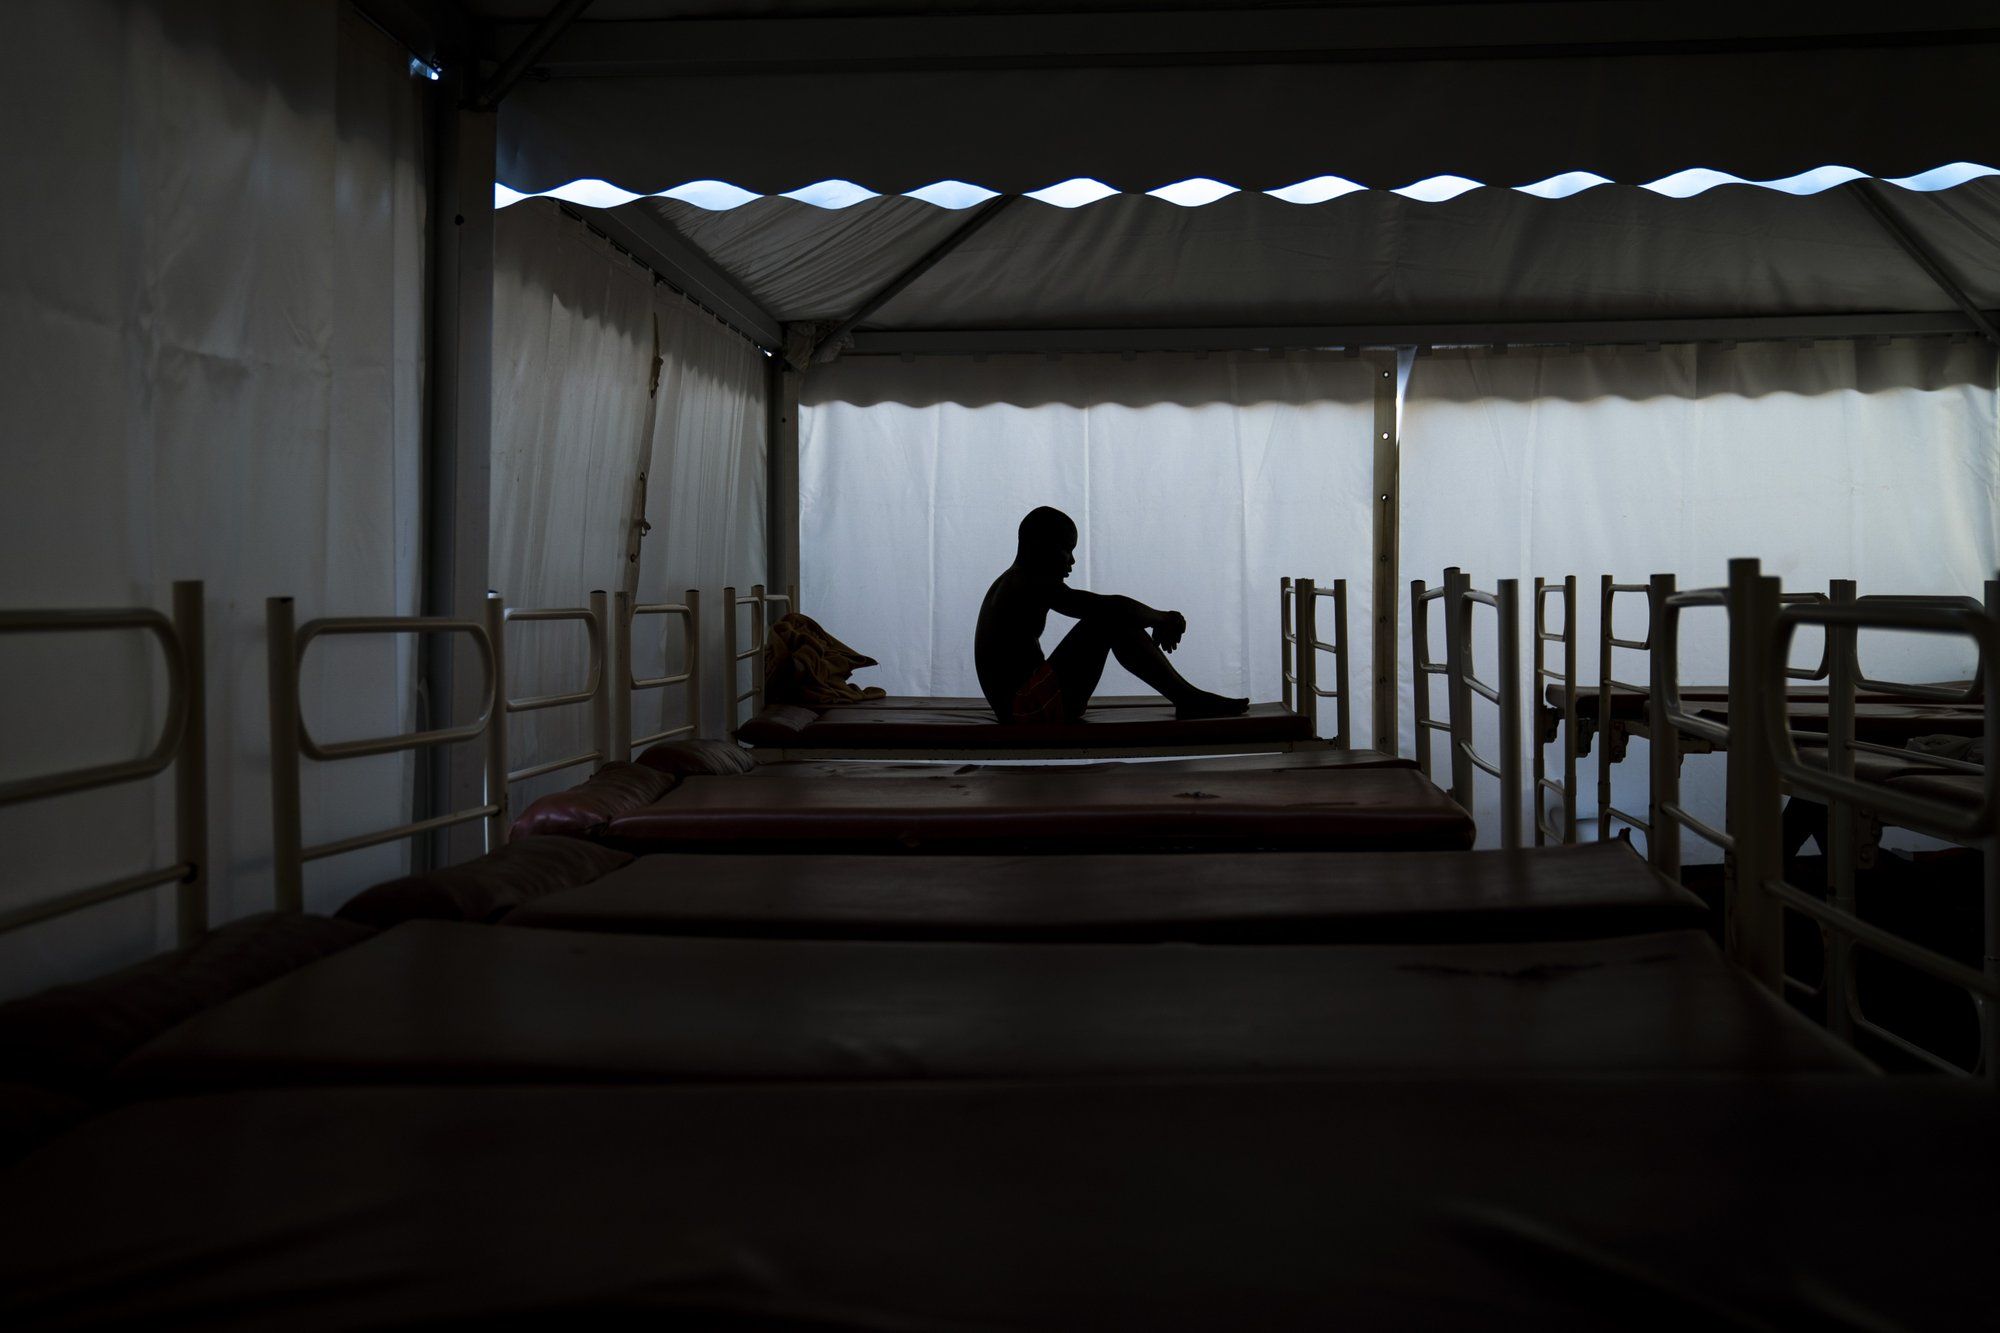 Mamadou Patherazi, from Guinea, sits on a bunk bed of the Modern Christian Mission Church in Fuerteventura, one of the Canary Islands, Spain, on Saturday, Aug. 22, 2020. Image by Emilio Morenatti/AP Photo. Spain, 2020.